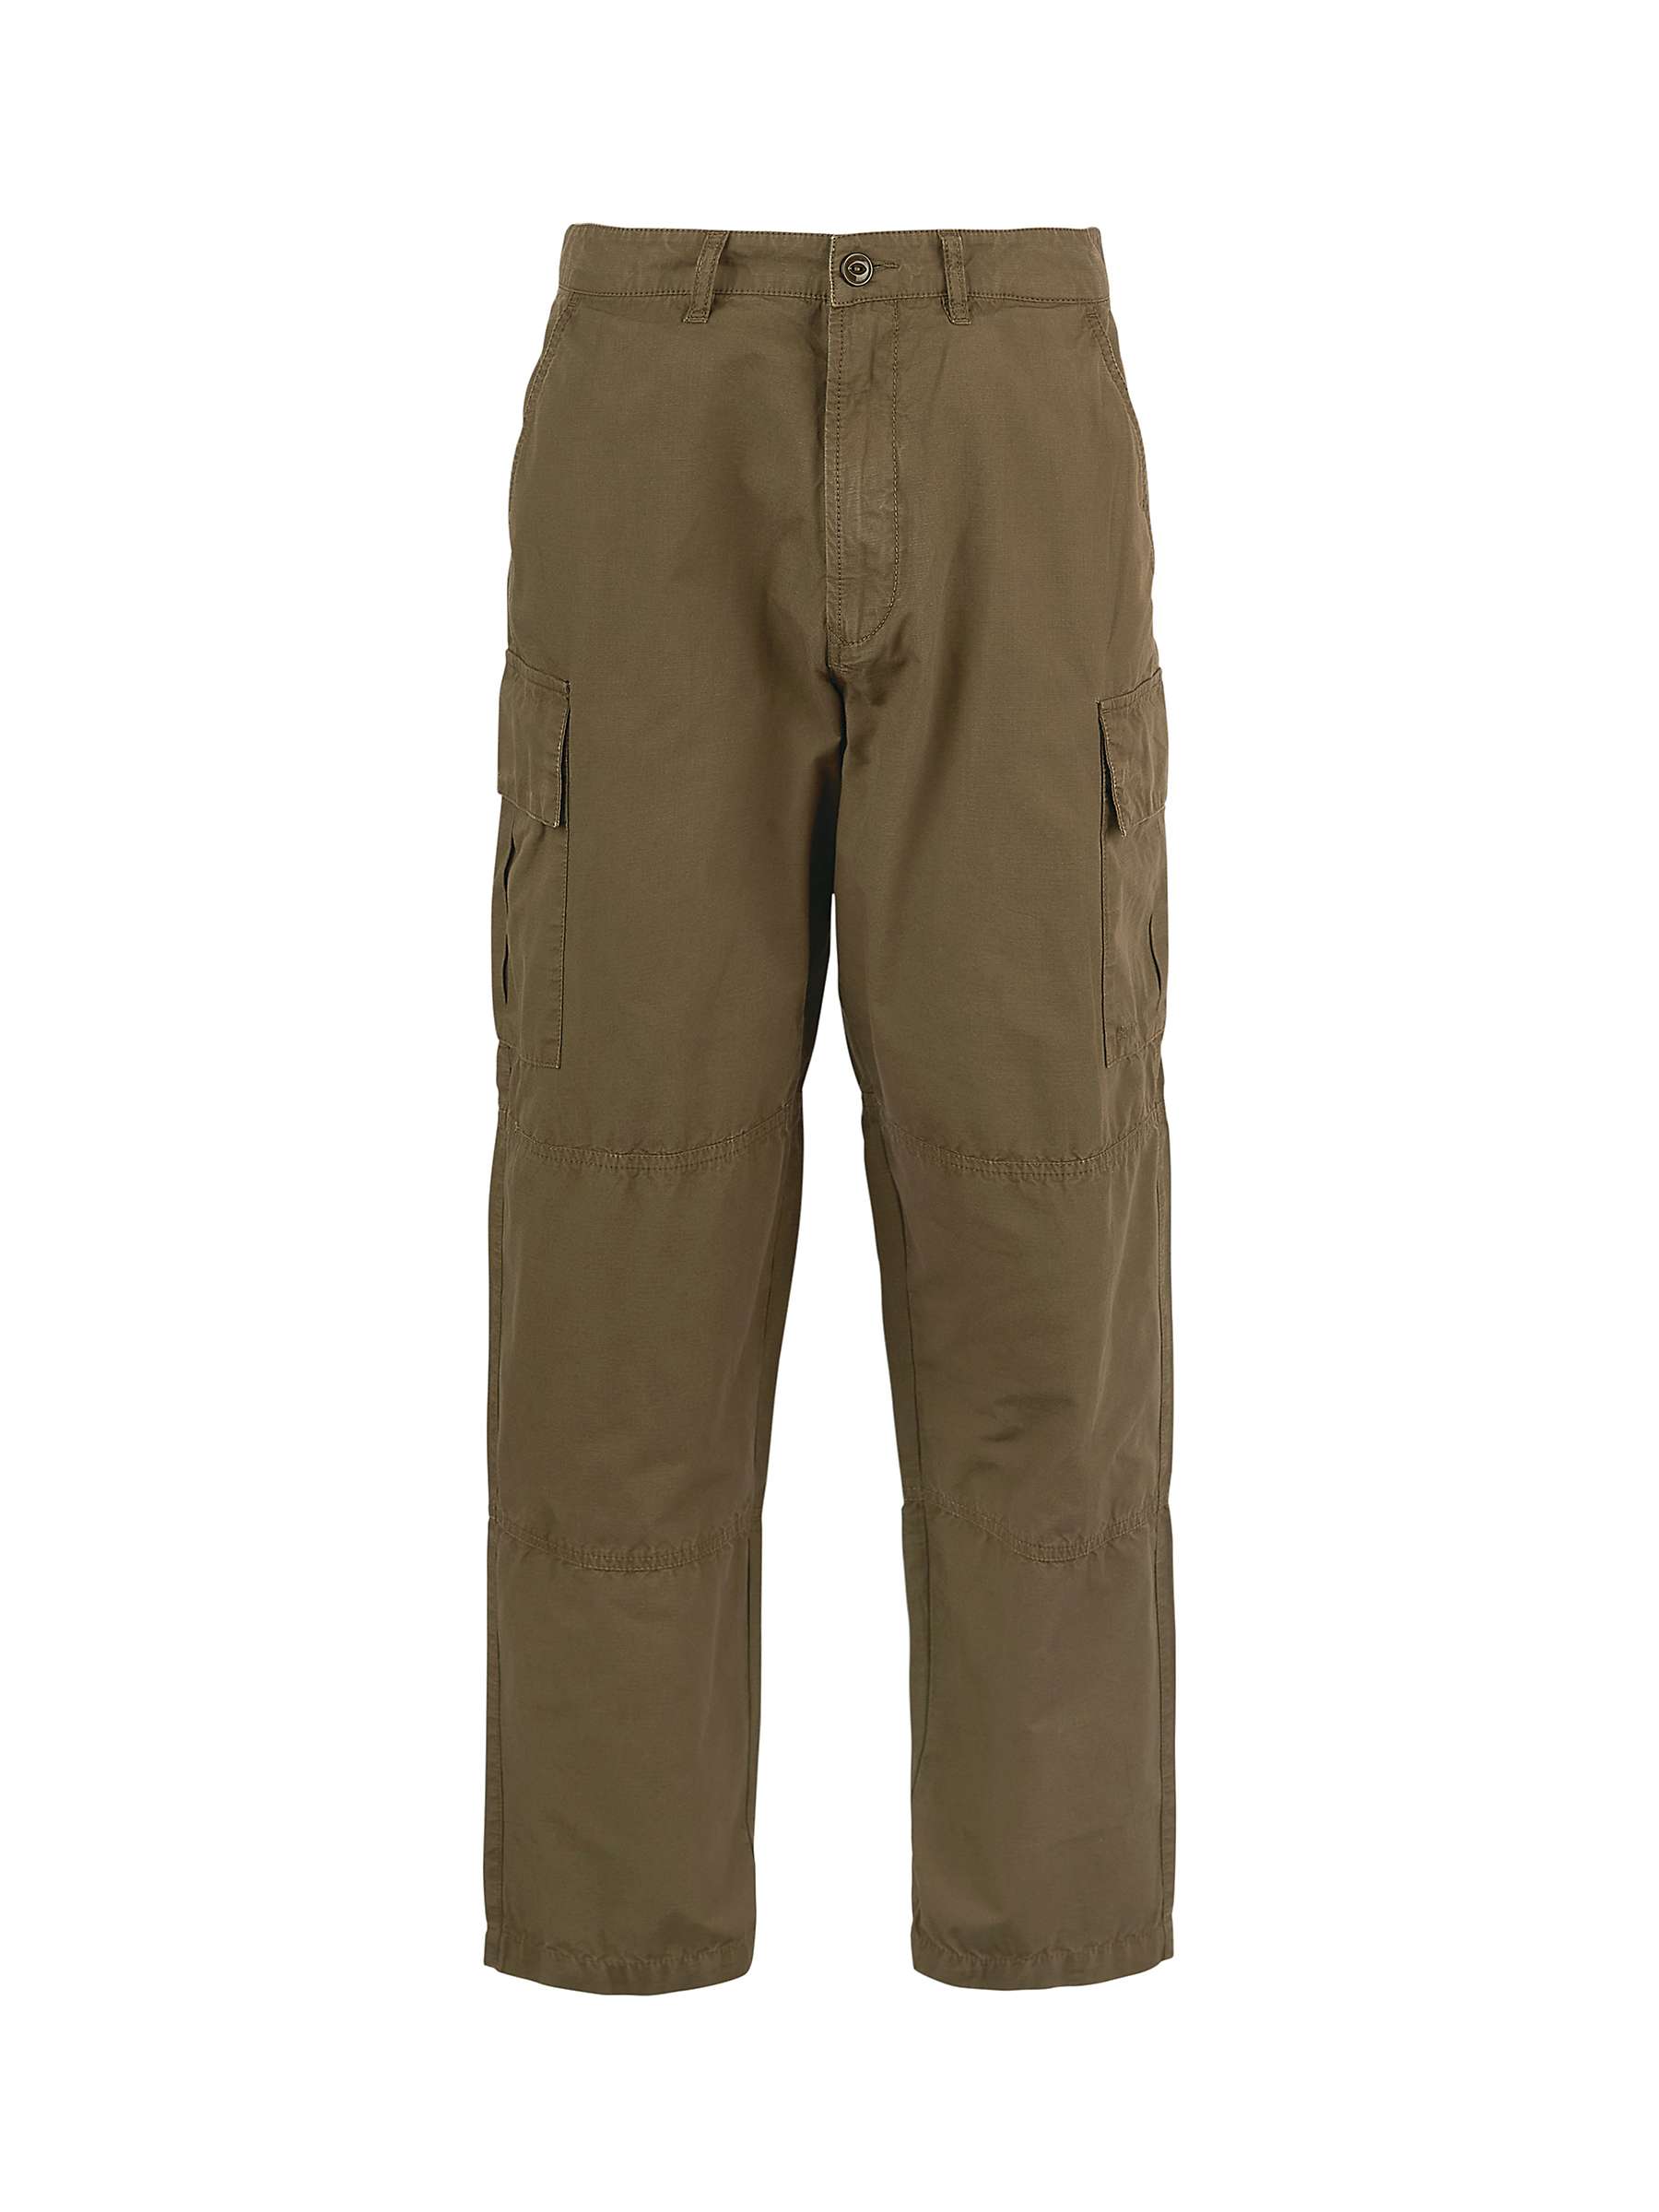 Barbour Cargo Trousers, Beech at John Lewis & Partners